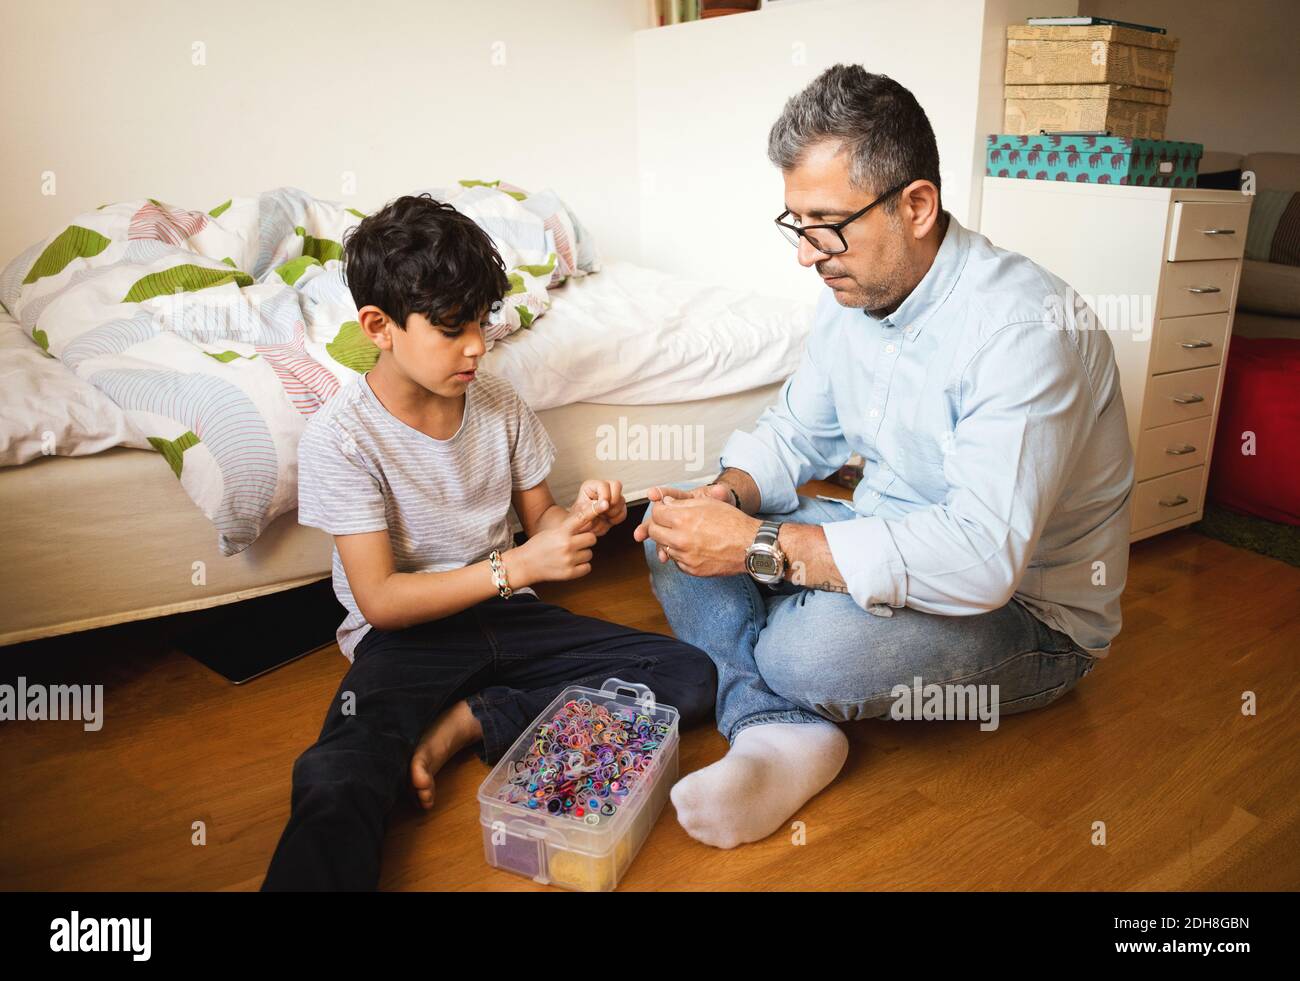 Father and son playing with rubber bands while sitting on hardwood floor at home Stock Photo